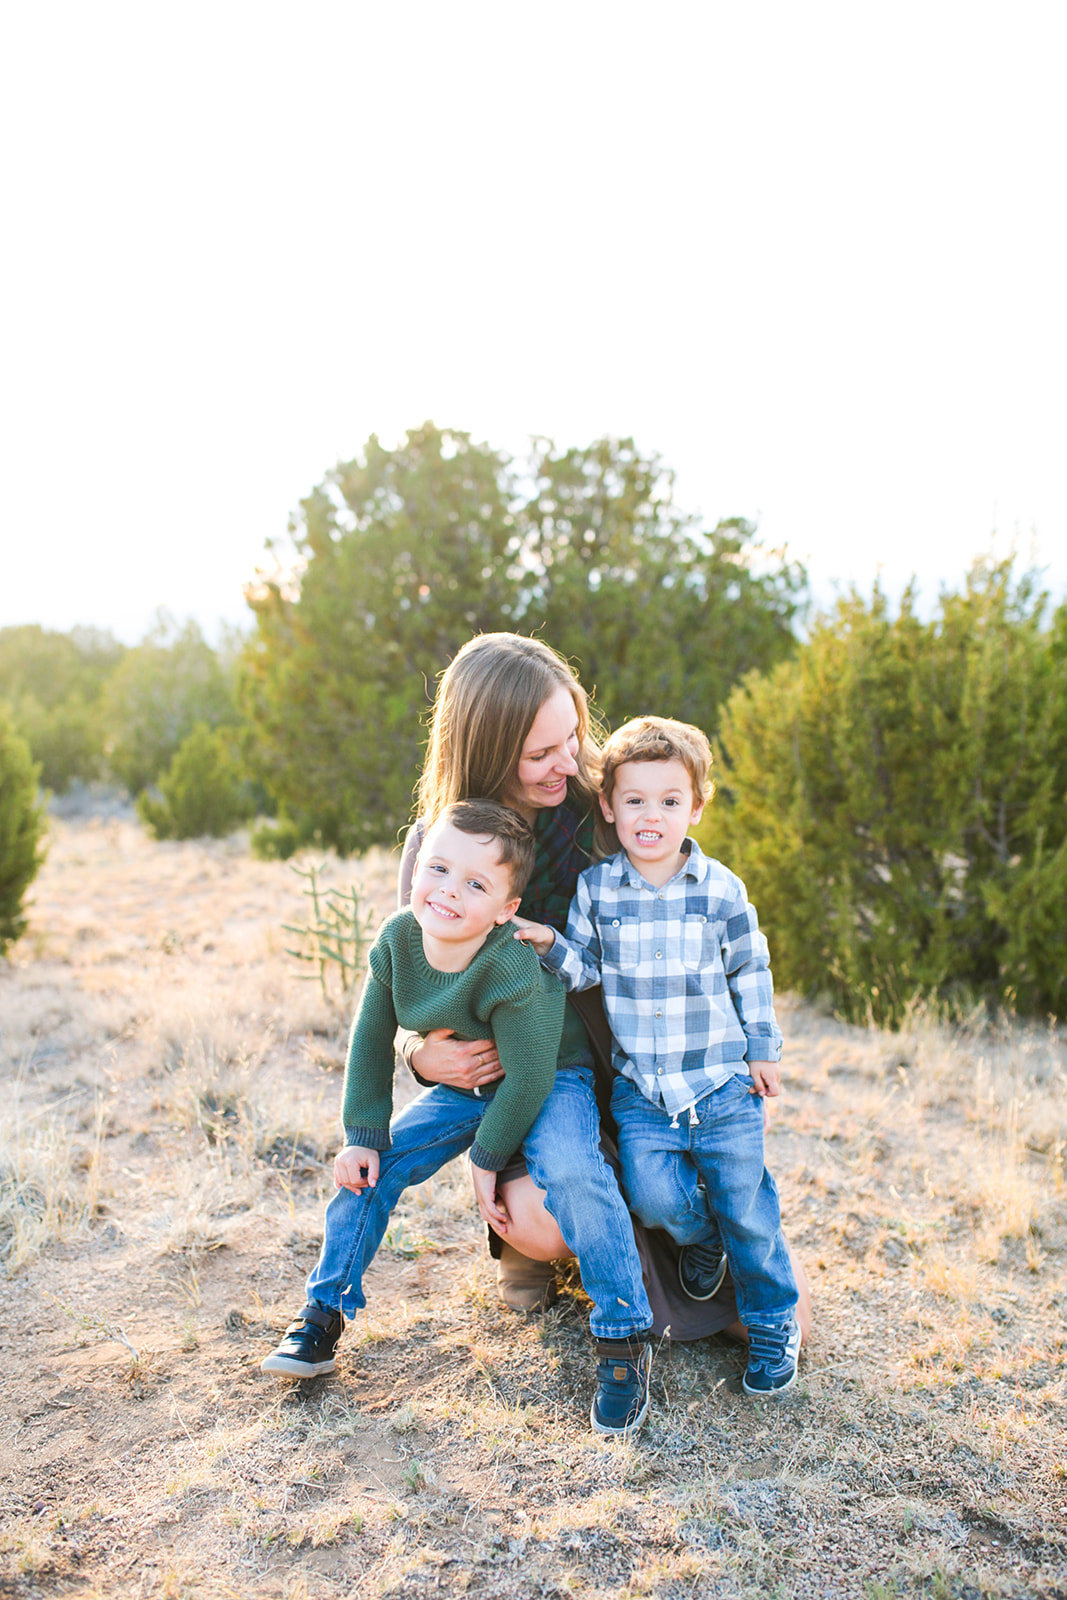 Albuquerque Family Photography_Foothills_www.tylerbrooke.com_Kate Kauffman_026